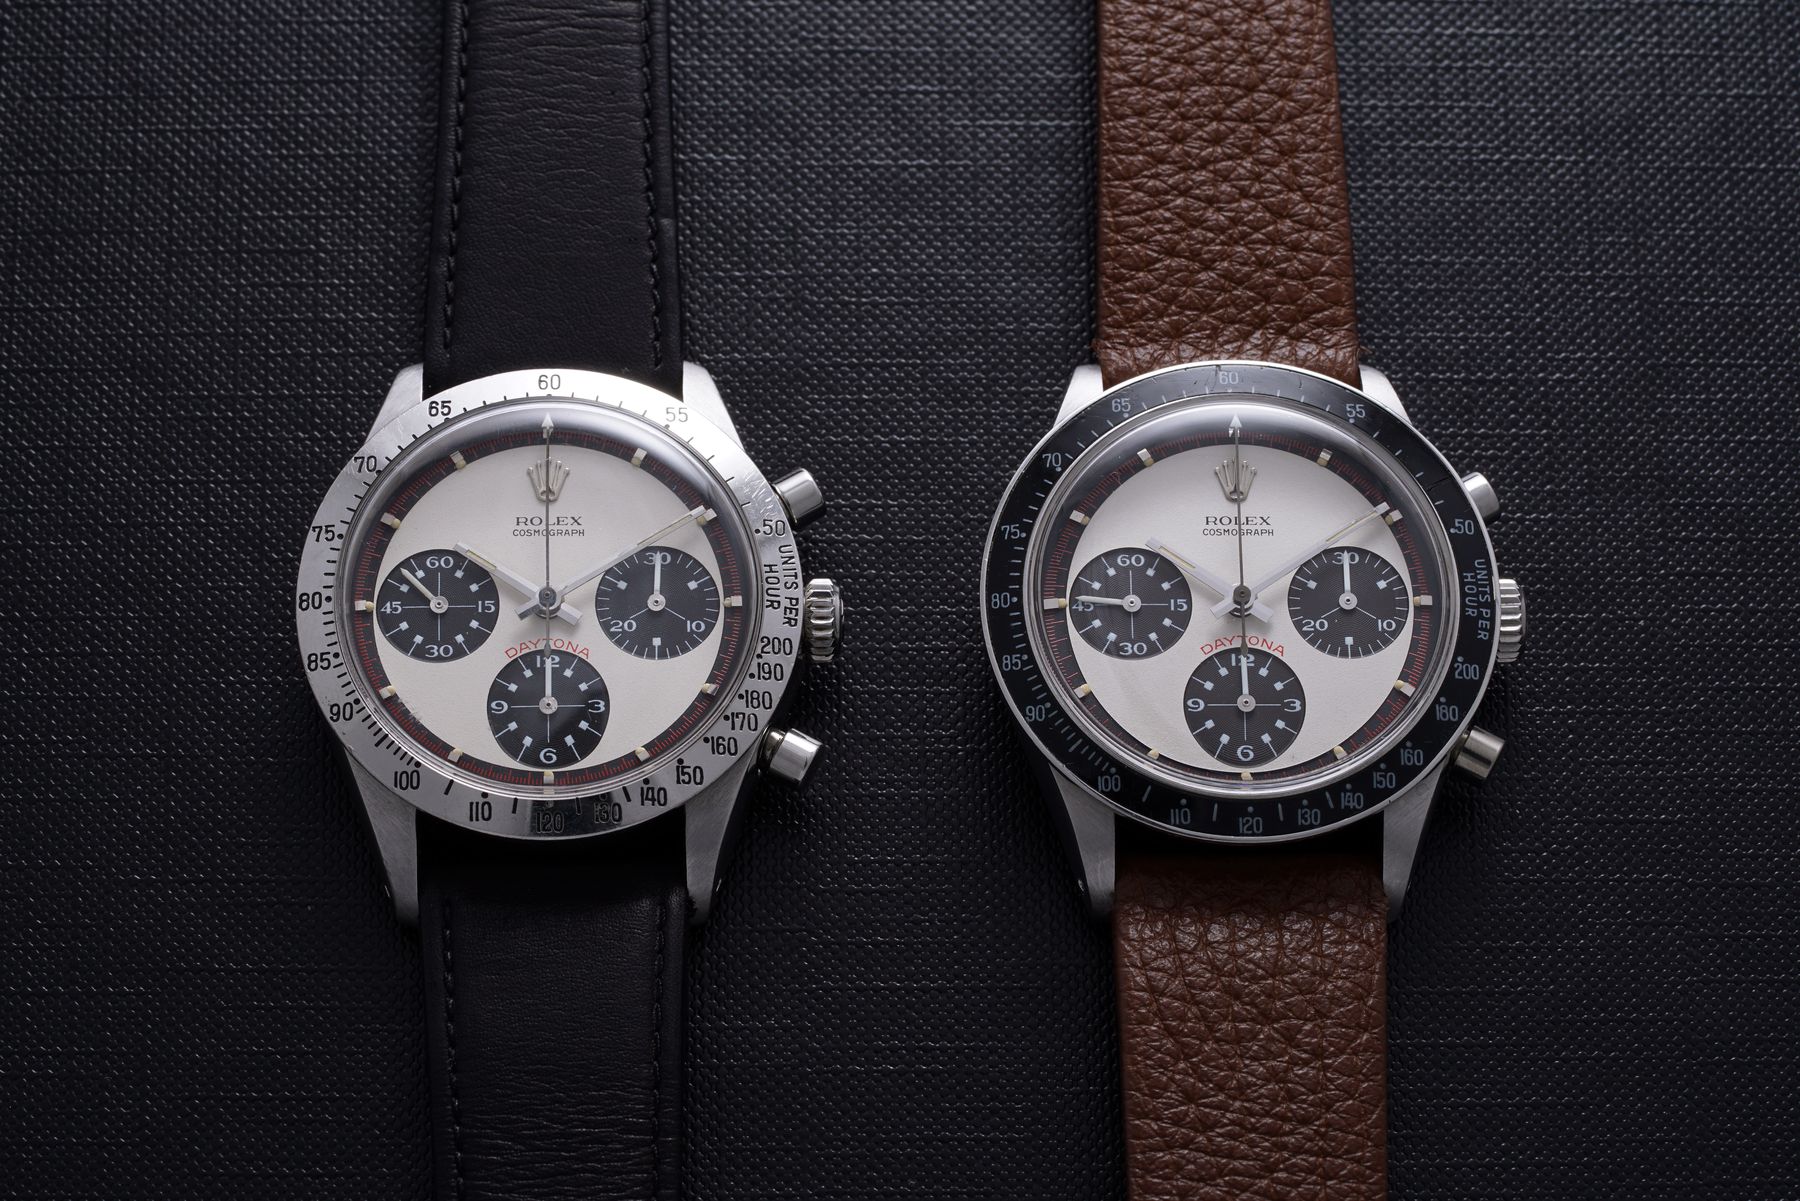 PHILLIPS : A Novice's Guide To The Rolex Cosmograph Daytona